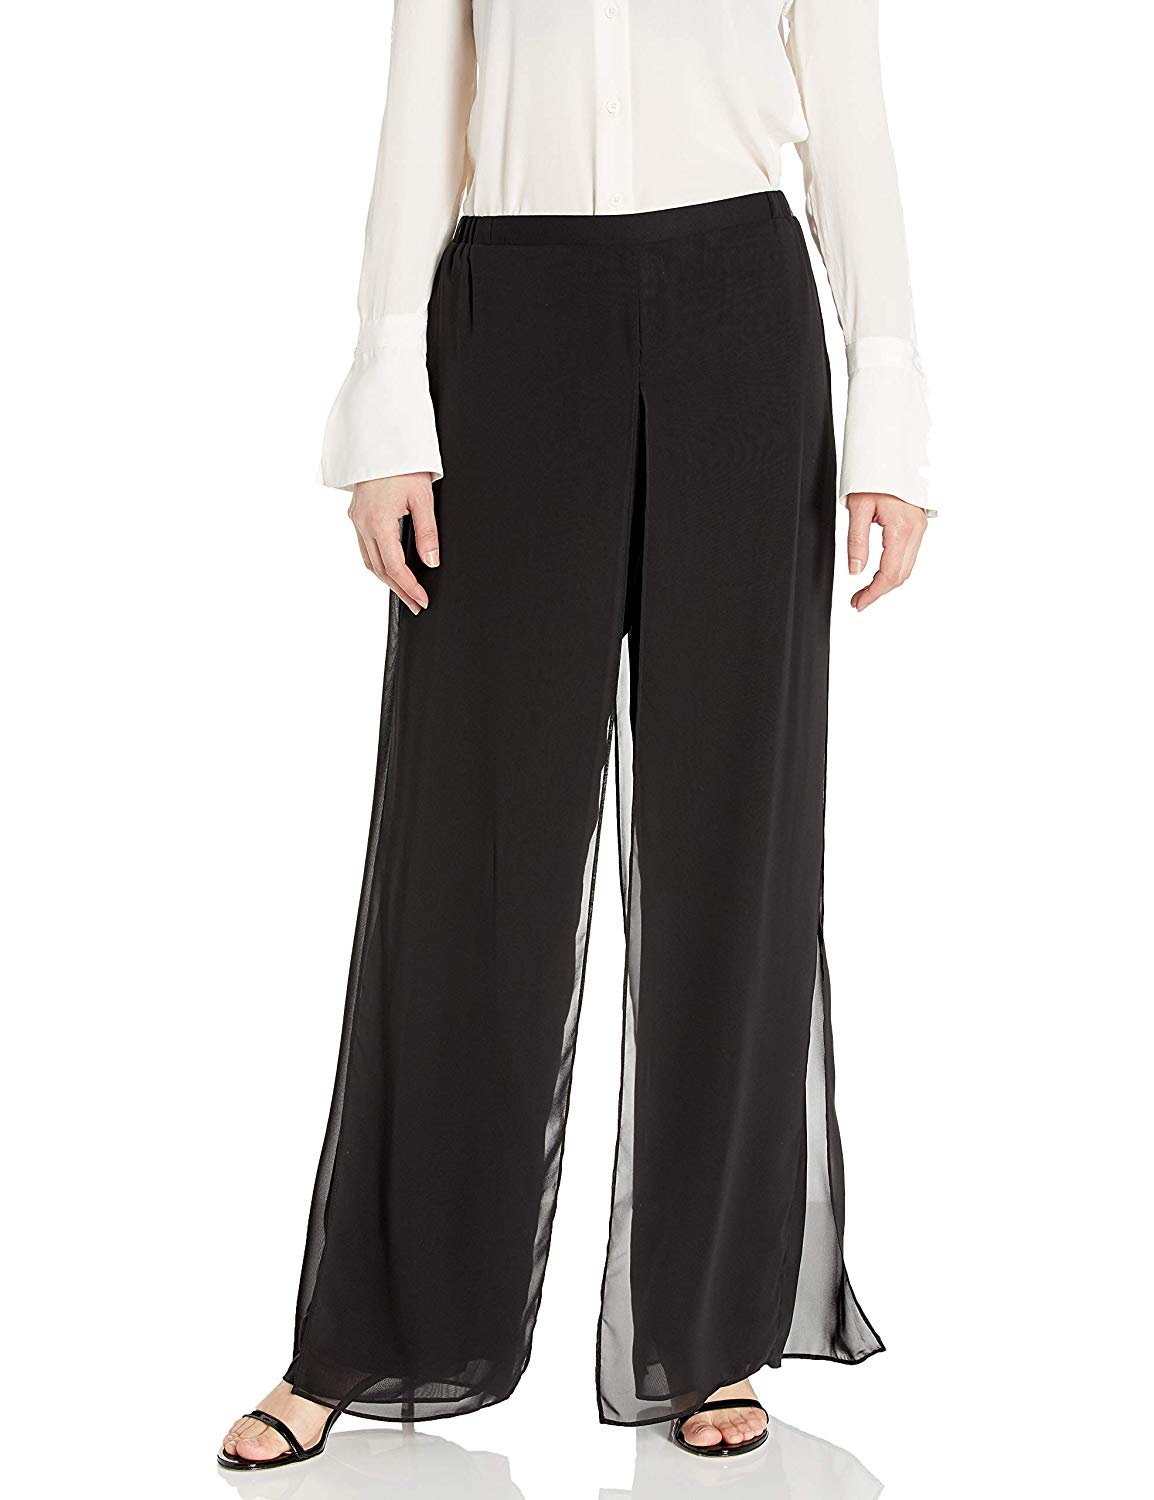 14 Palazzo Pants Outfit For Work - The Finest Feed